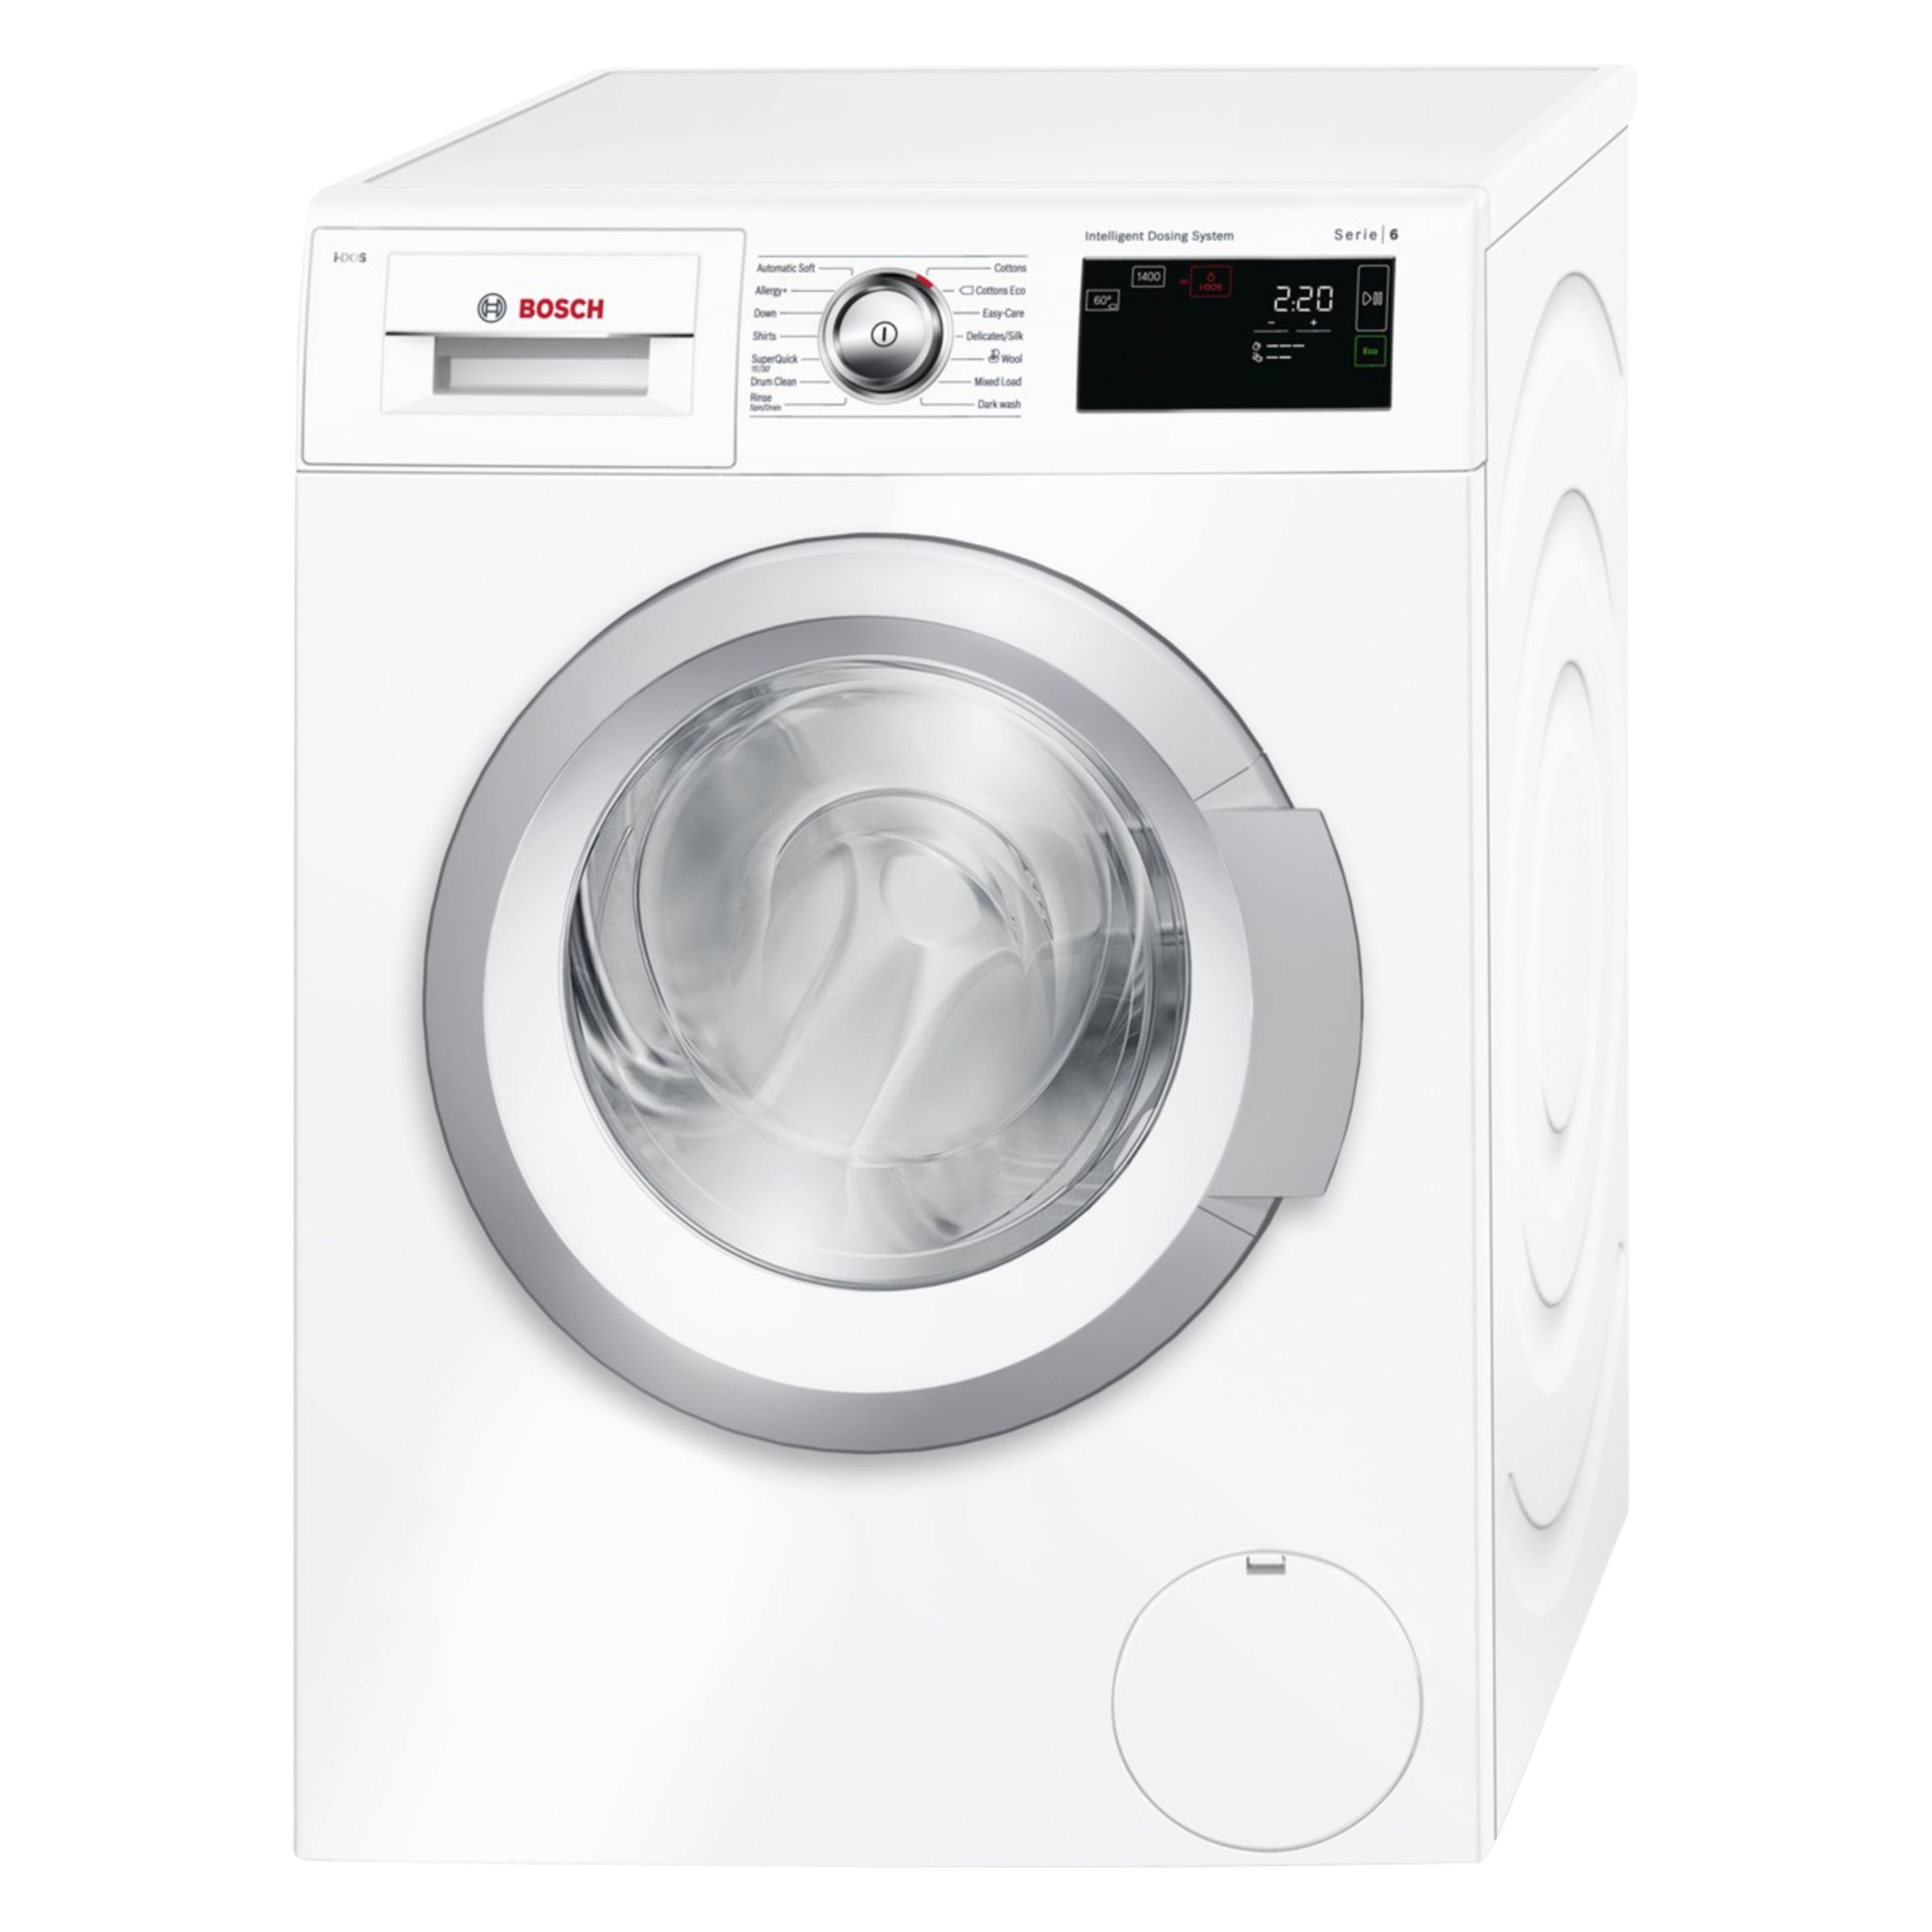 Bosch WAT28660GB Freestanding Washing Machine with i-DOS, 8kg Load, 1400rpm, A+++ Energy Rating ...